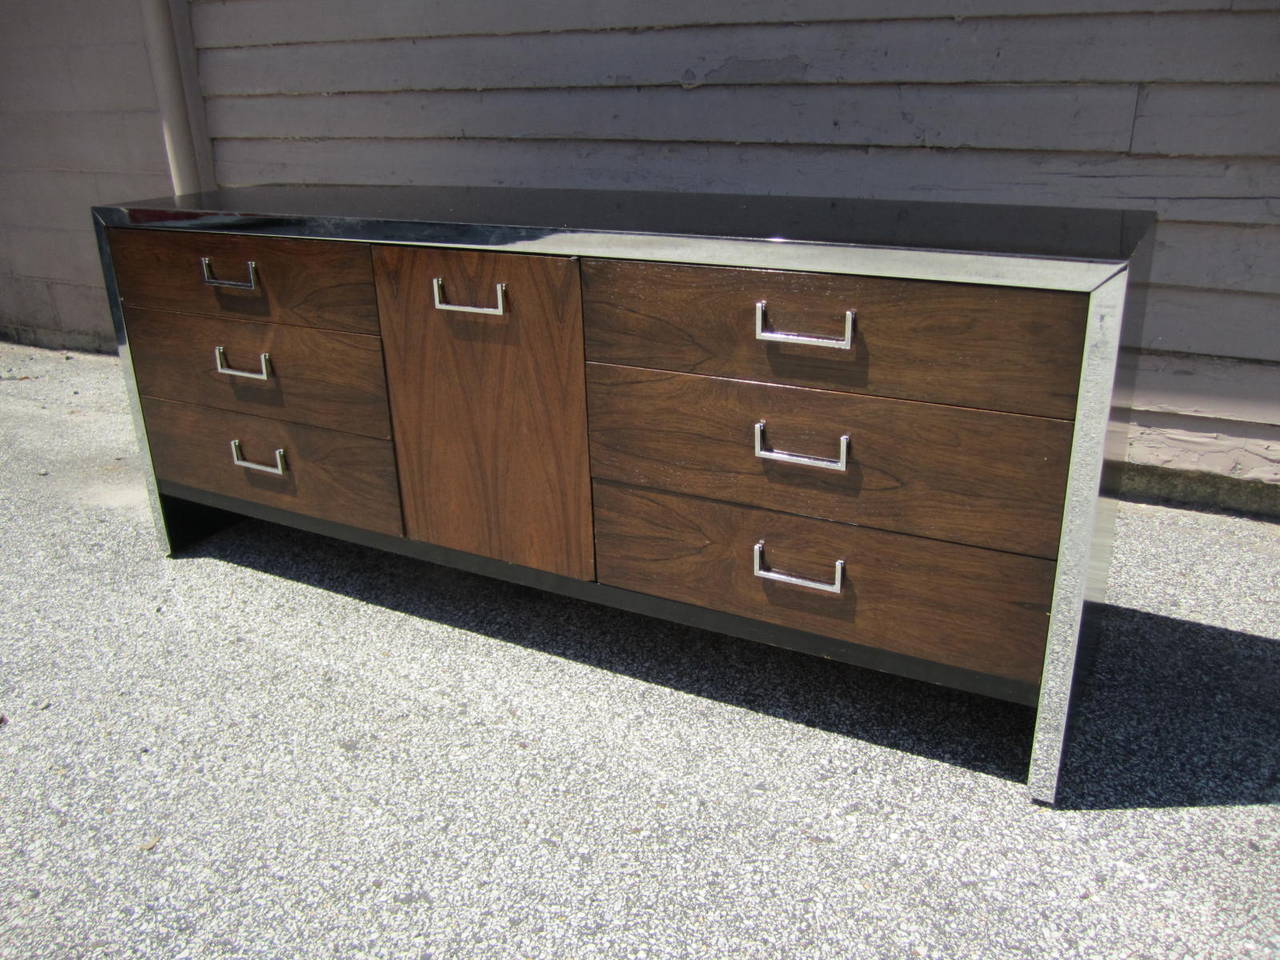 A long black lacquer and rosewood dresser in the style of Milo Baughman.  Consists of six drawers with a center cabinet including three smaller drawers. Chrome trim and handles are clean and bright. Rosewood veneer is in very nice condition. A